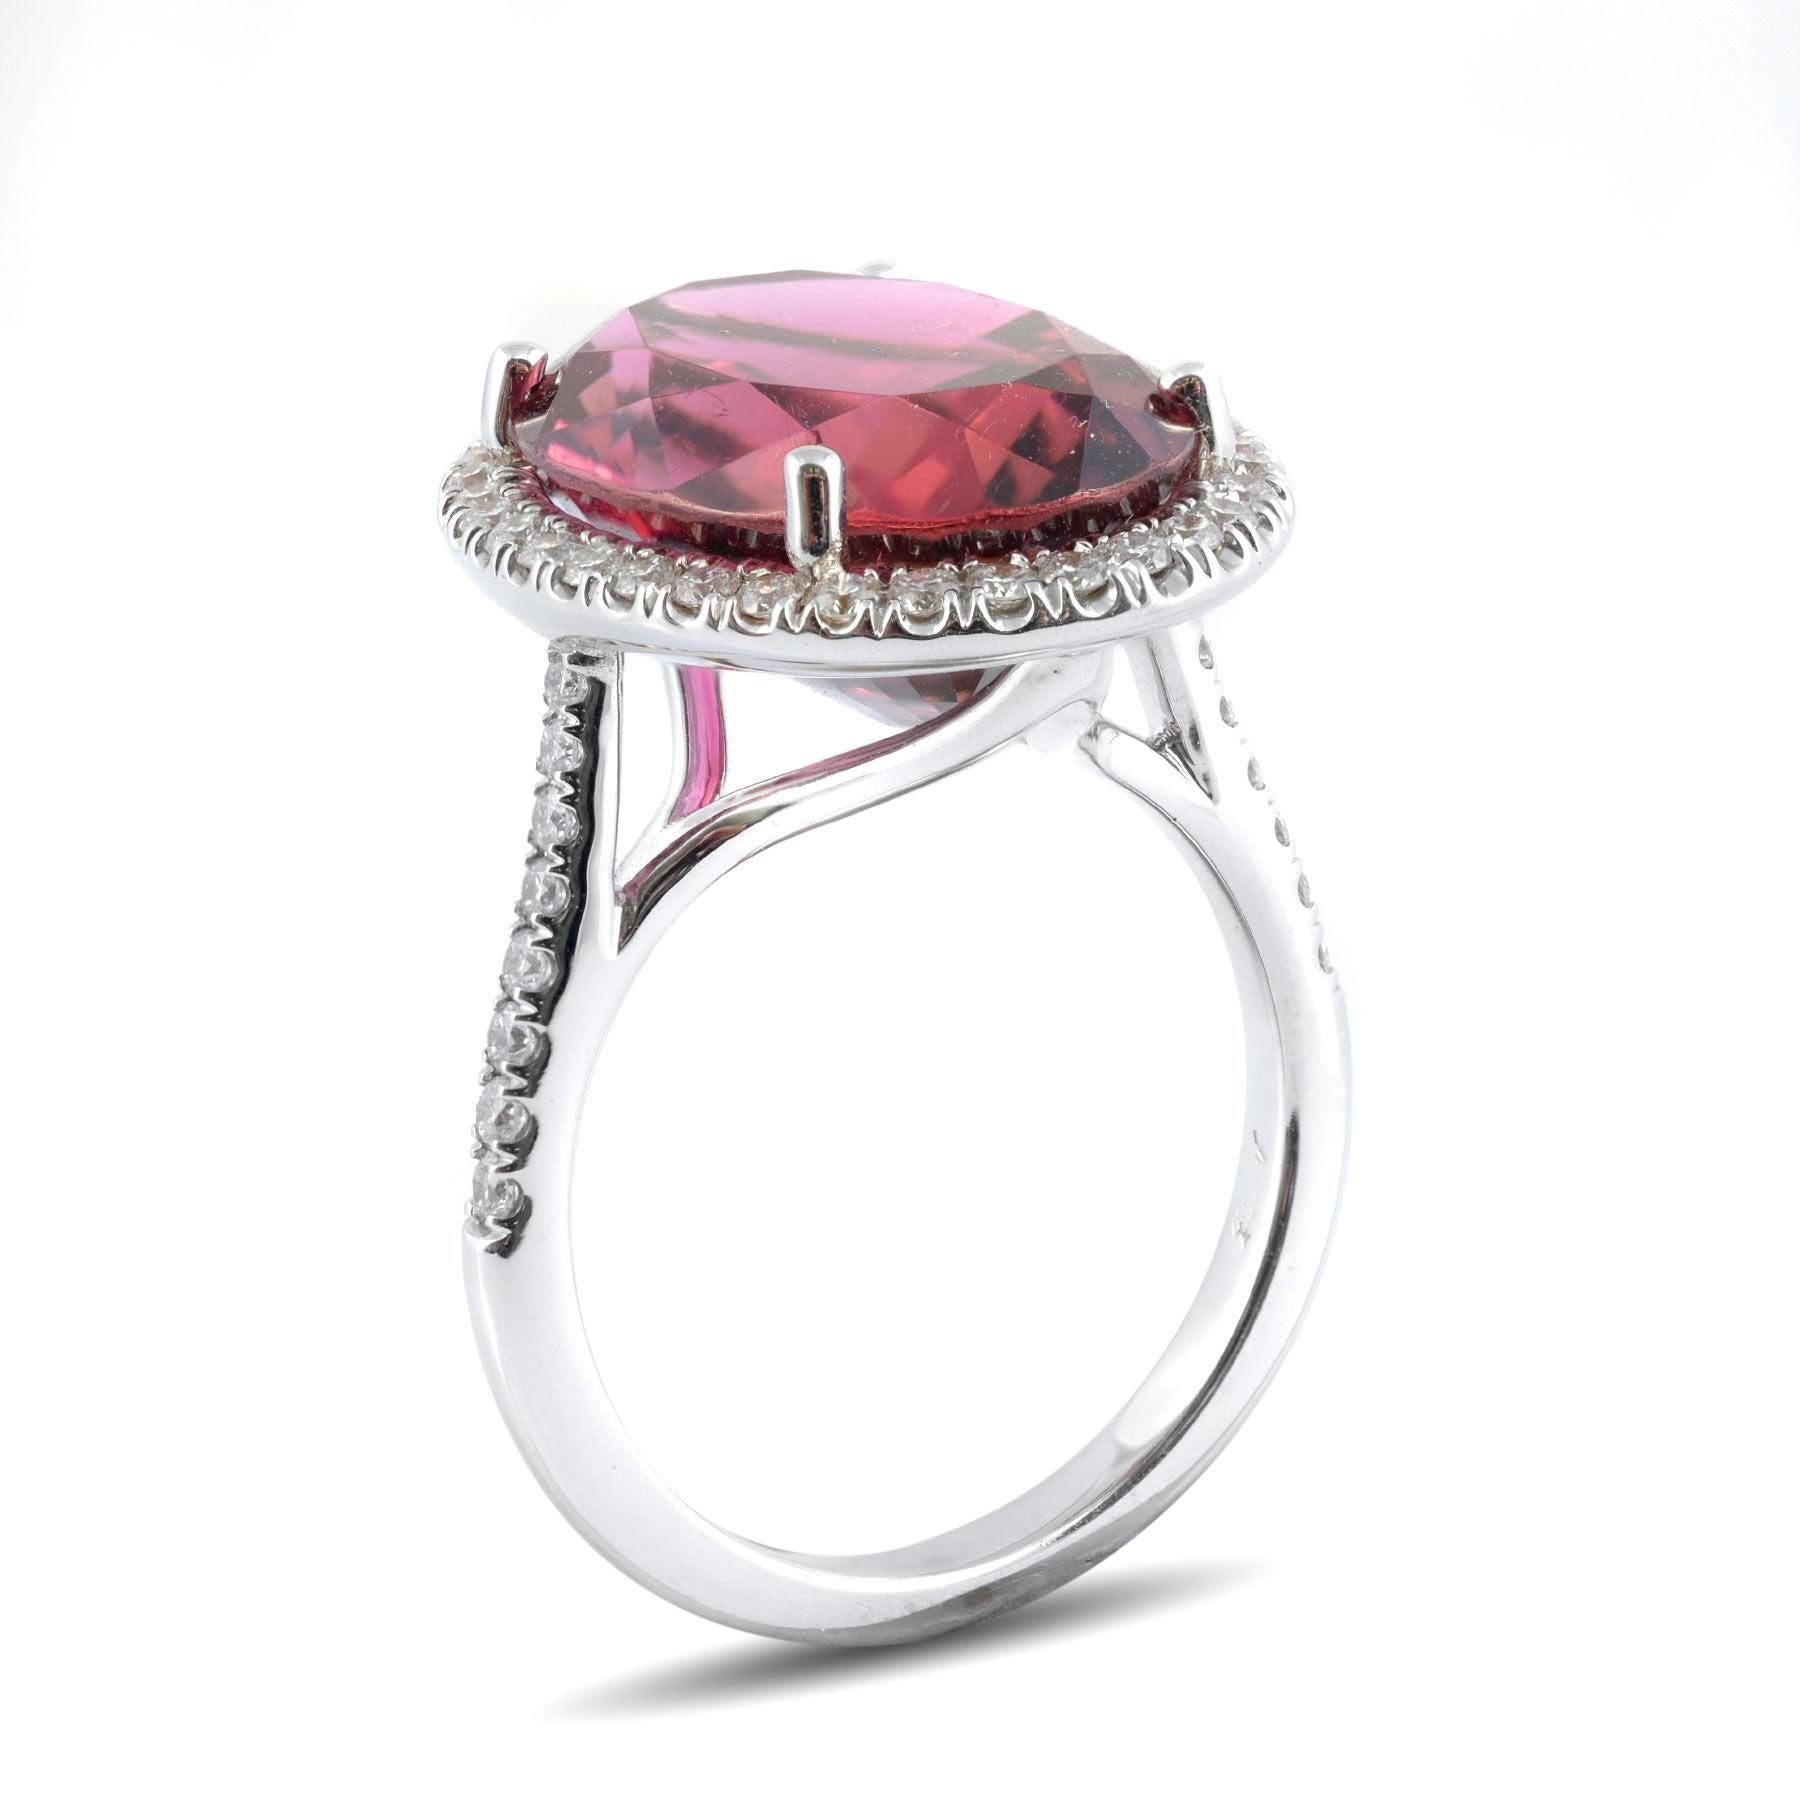 Rubellite’s are blessed with intense color and this 10.71 carat gemstone is no different. Rich fuchsia pinks paired with the play of light off each facet, creates an arresting display of color and internal fire. Surrounded by diamonds that add to